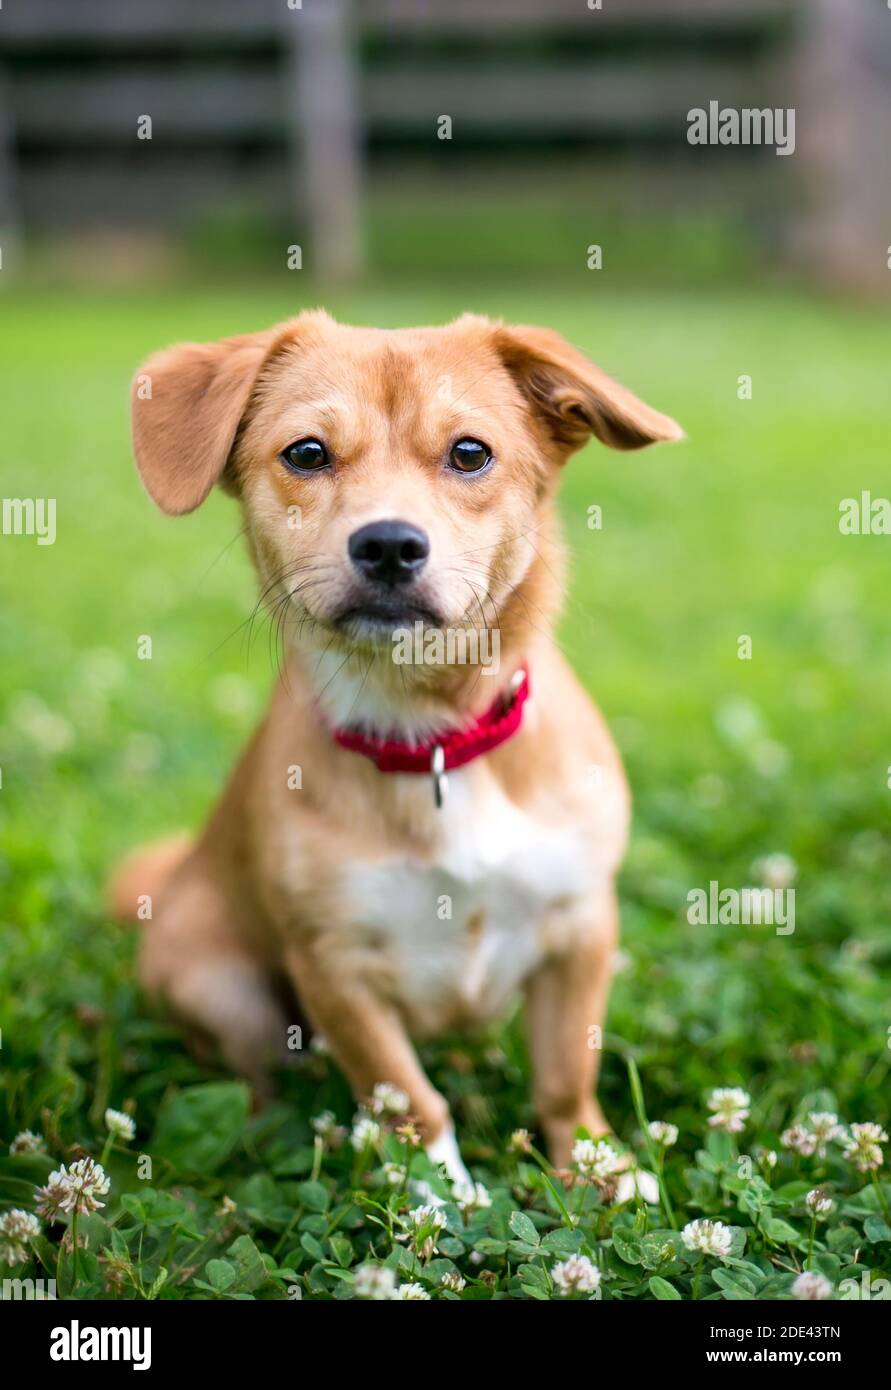 A cute brown mixed breed dog with floppy ears, wearing a red collar and sitting outdoors surrounded by white clover Stock Photo